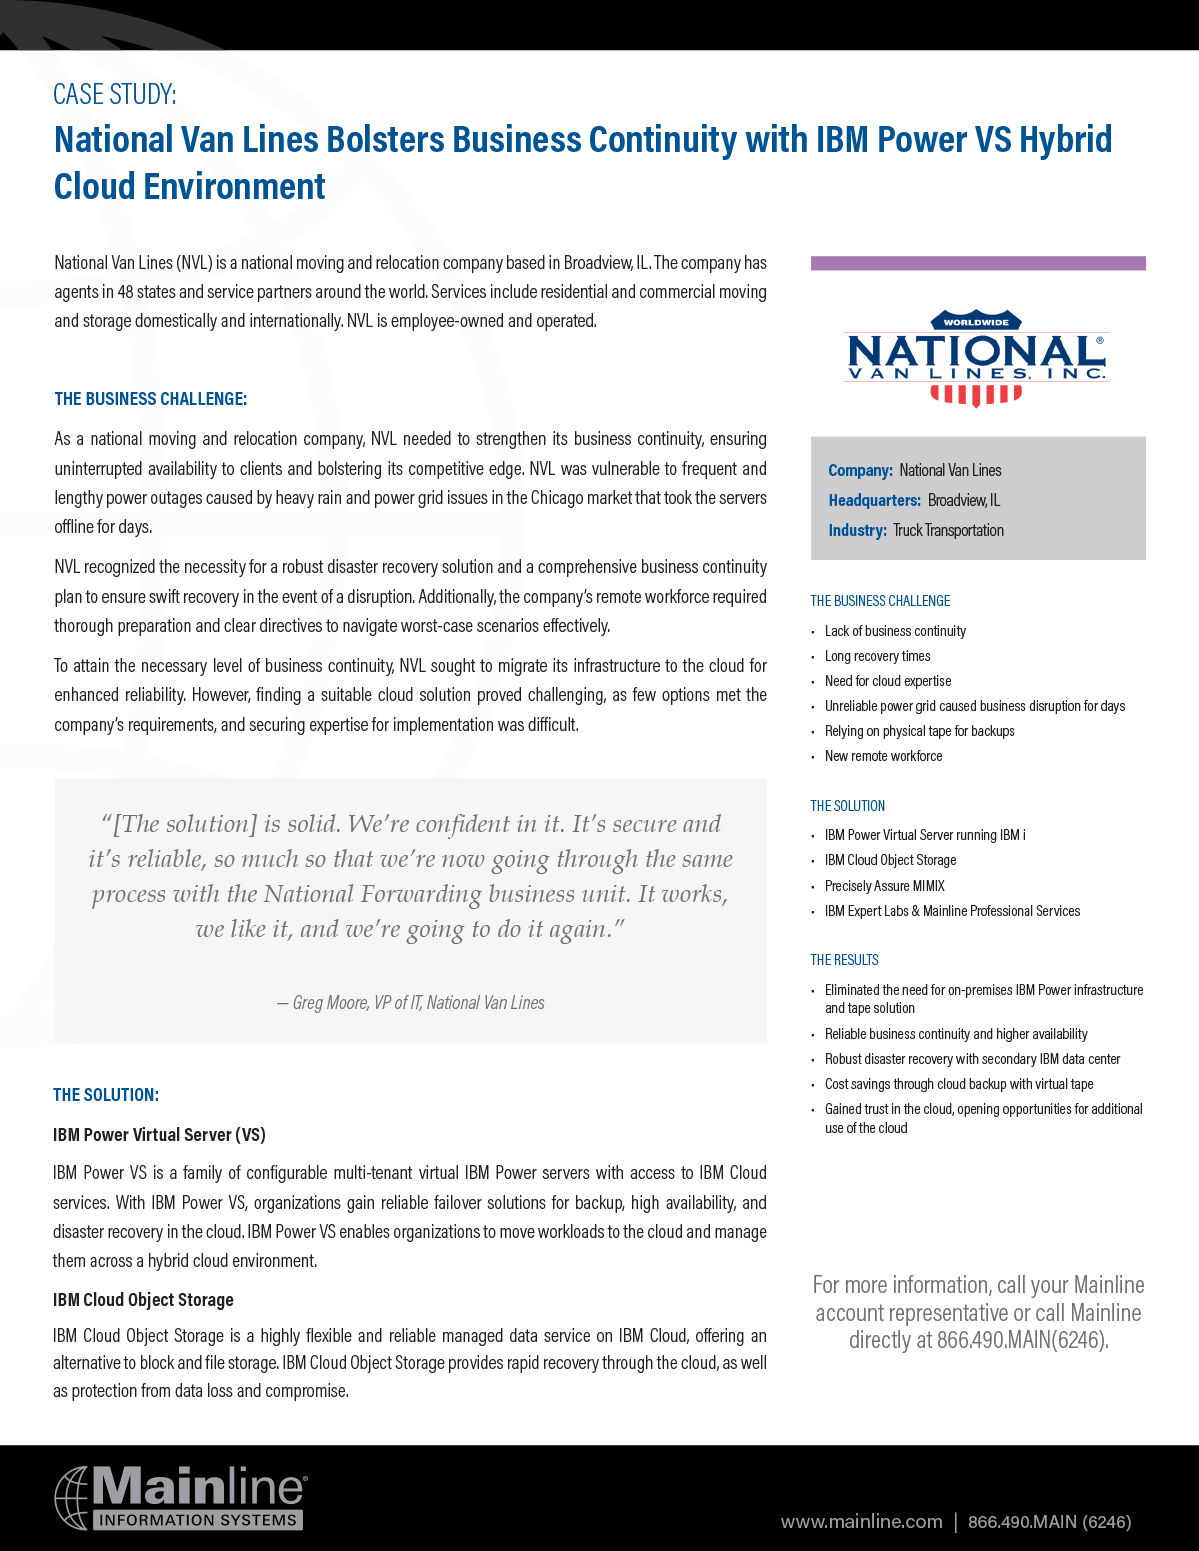 download the chickasaw client case study